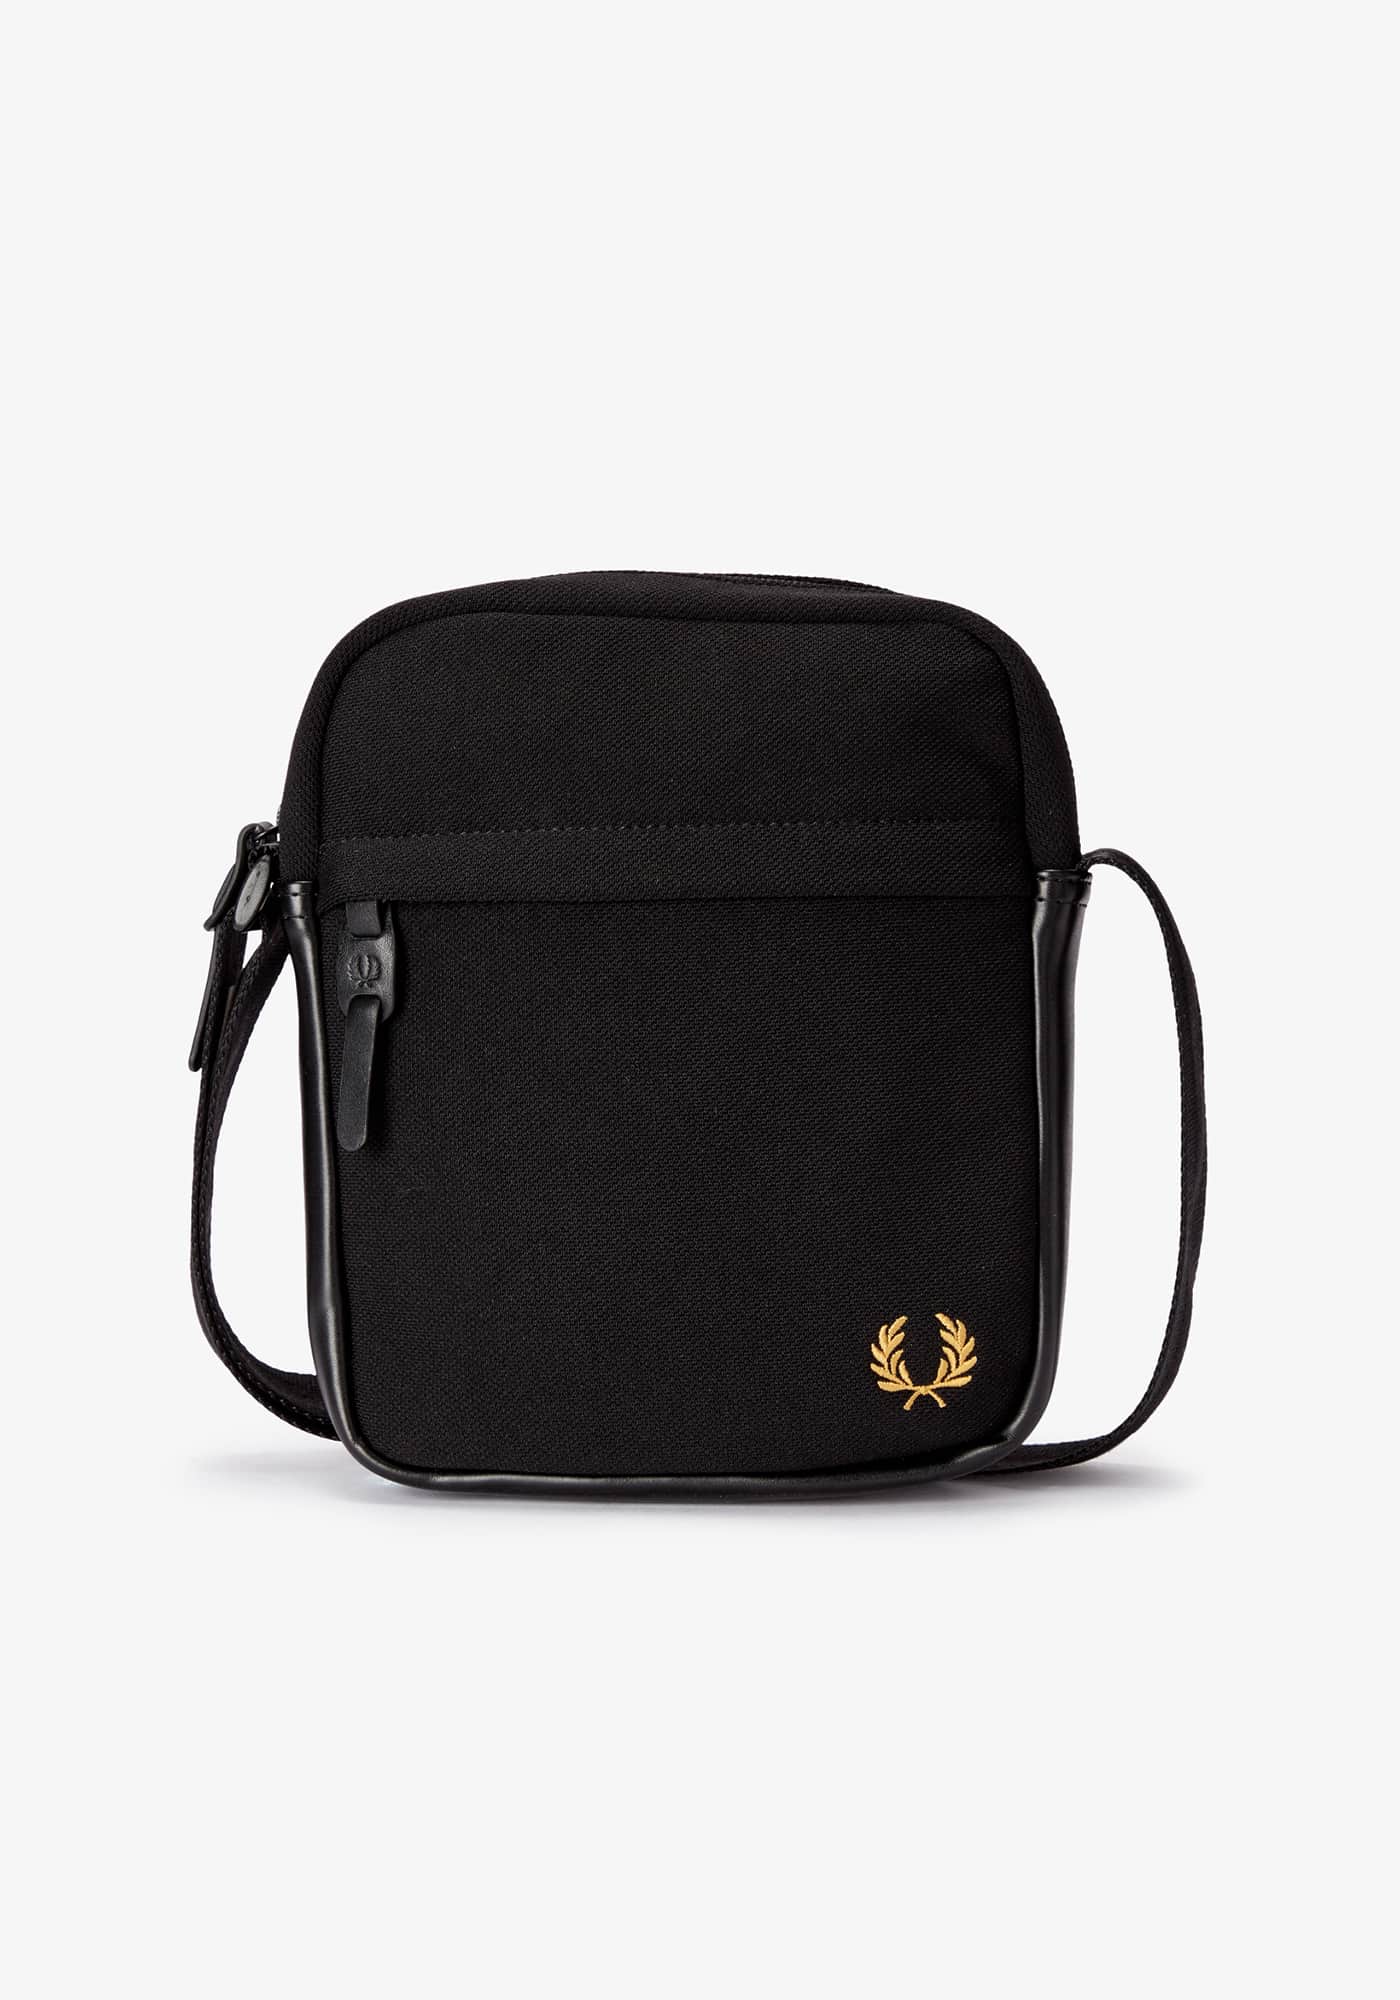 PIQUE SIDE BAG BY FRED PERRY